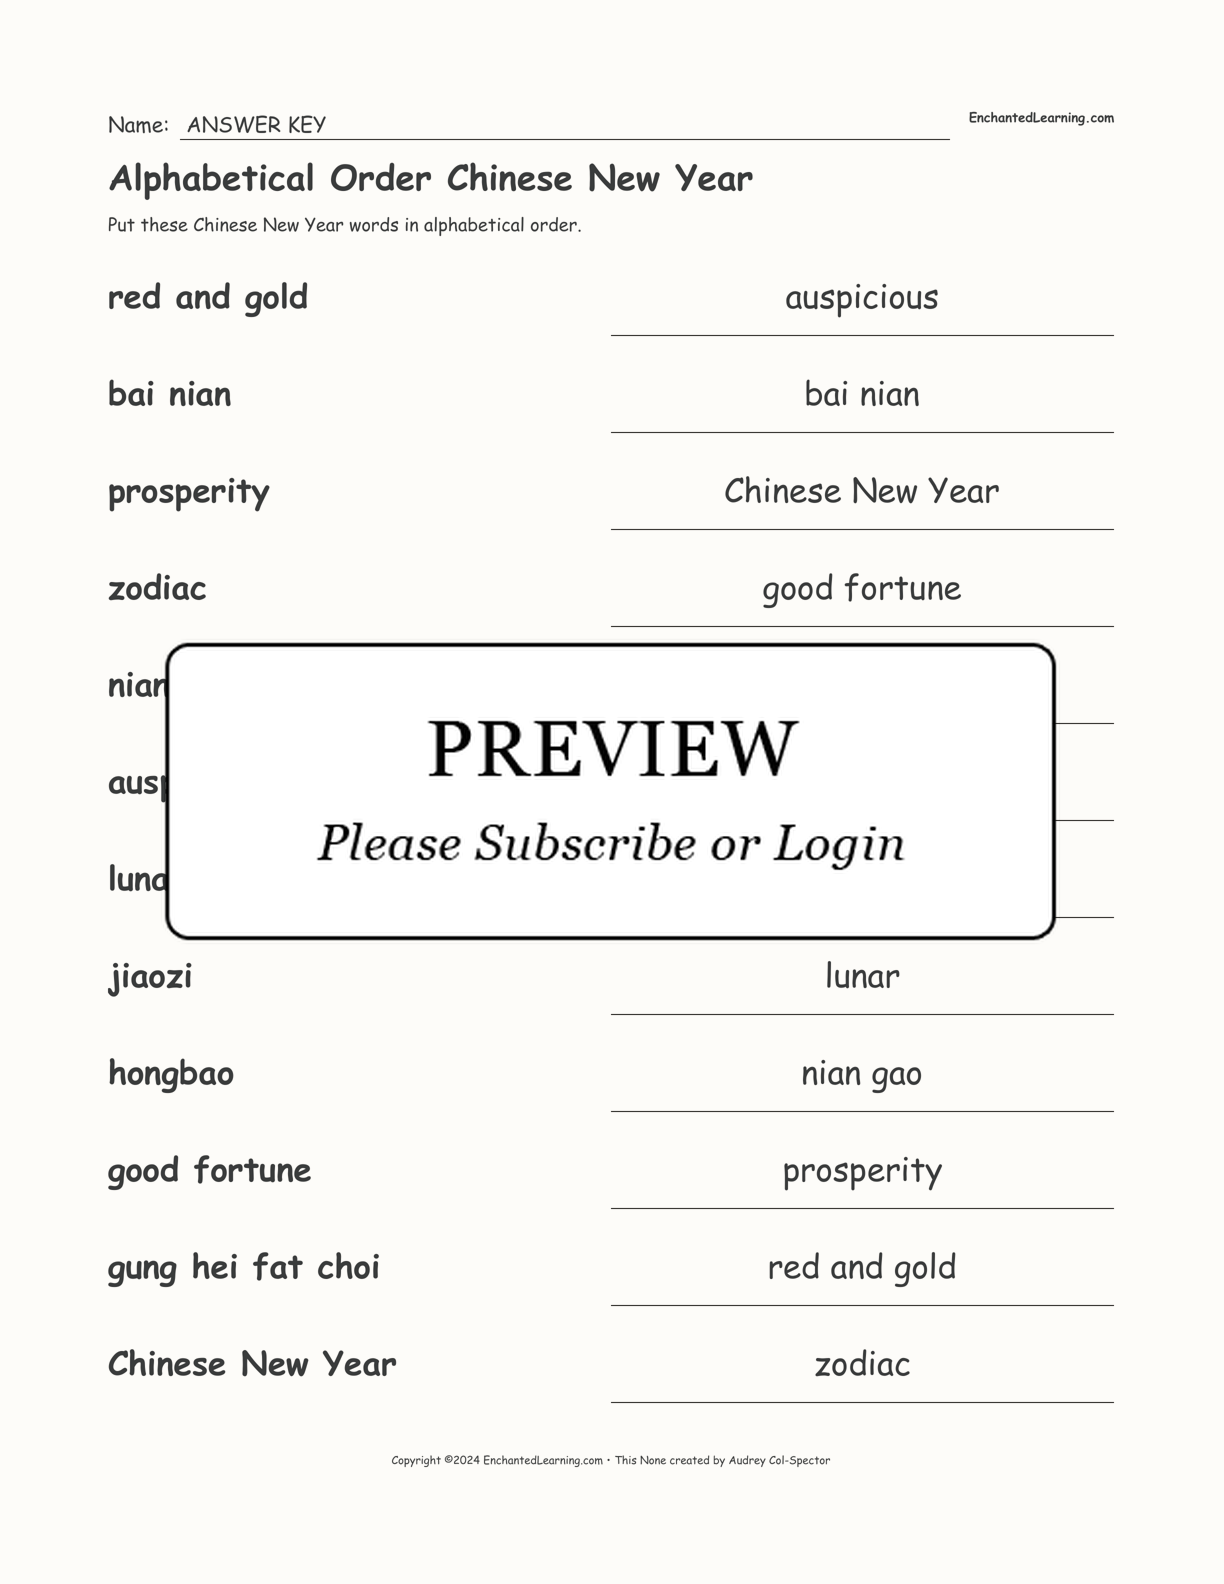 Alphabetical Order Chinese New Year interactive worksheet page 2